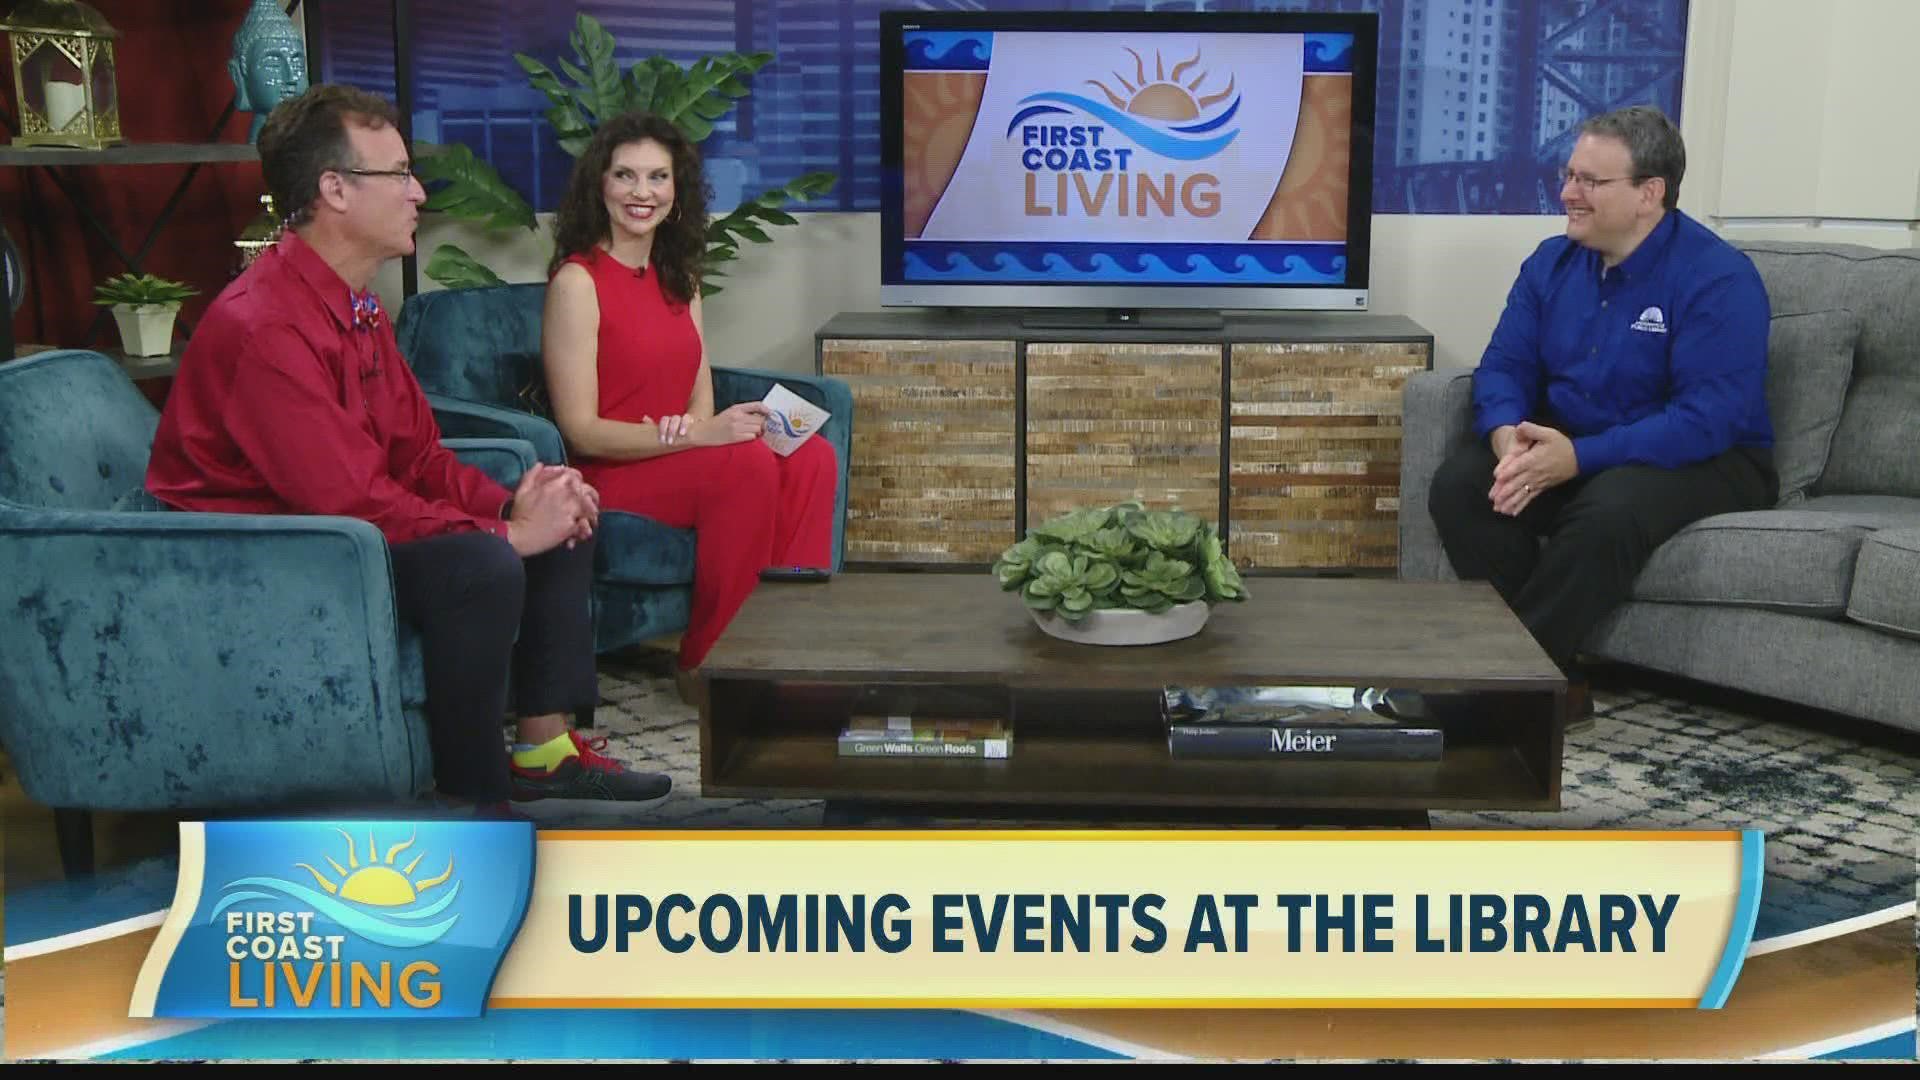 Chris Boivin of the Jacksonville Public Library shares details on various free reading programs, challenges, and contests for the whole family.